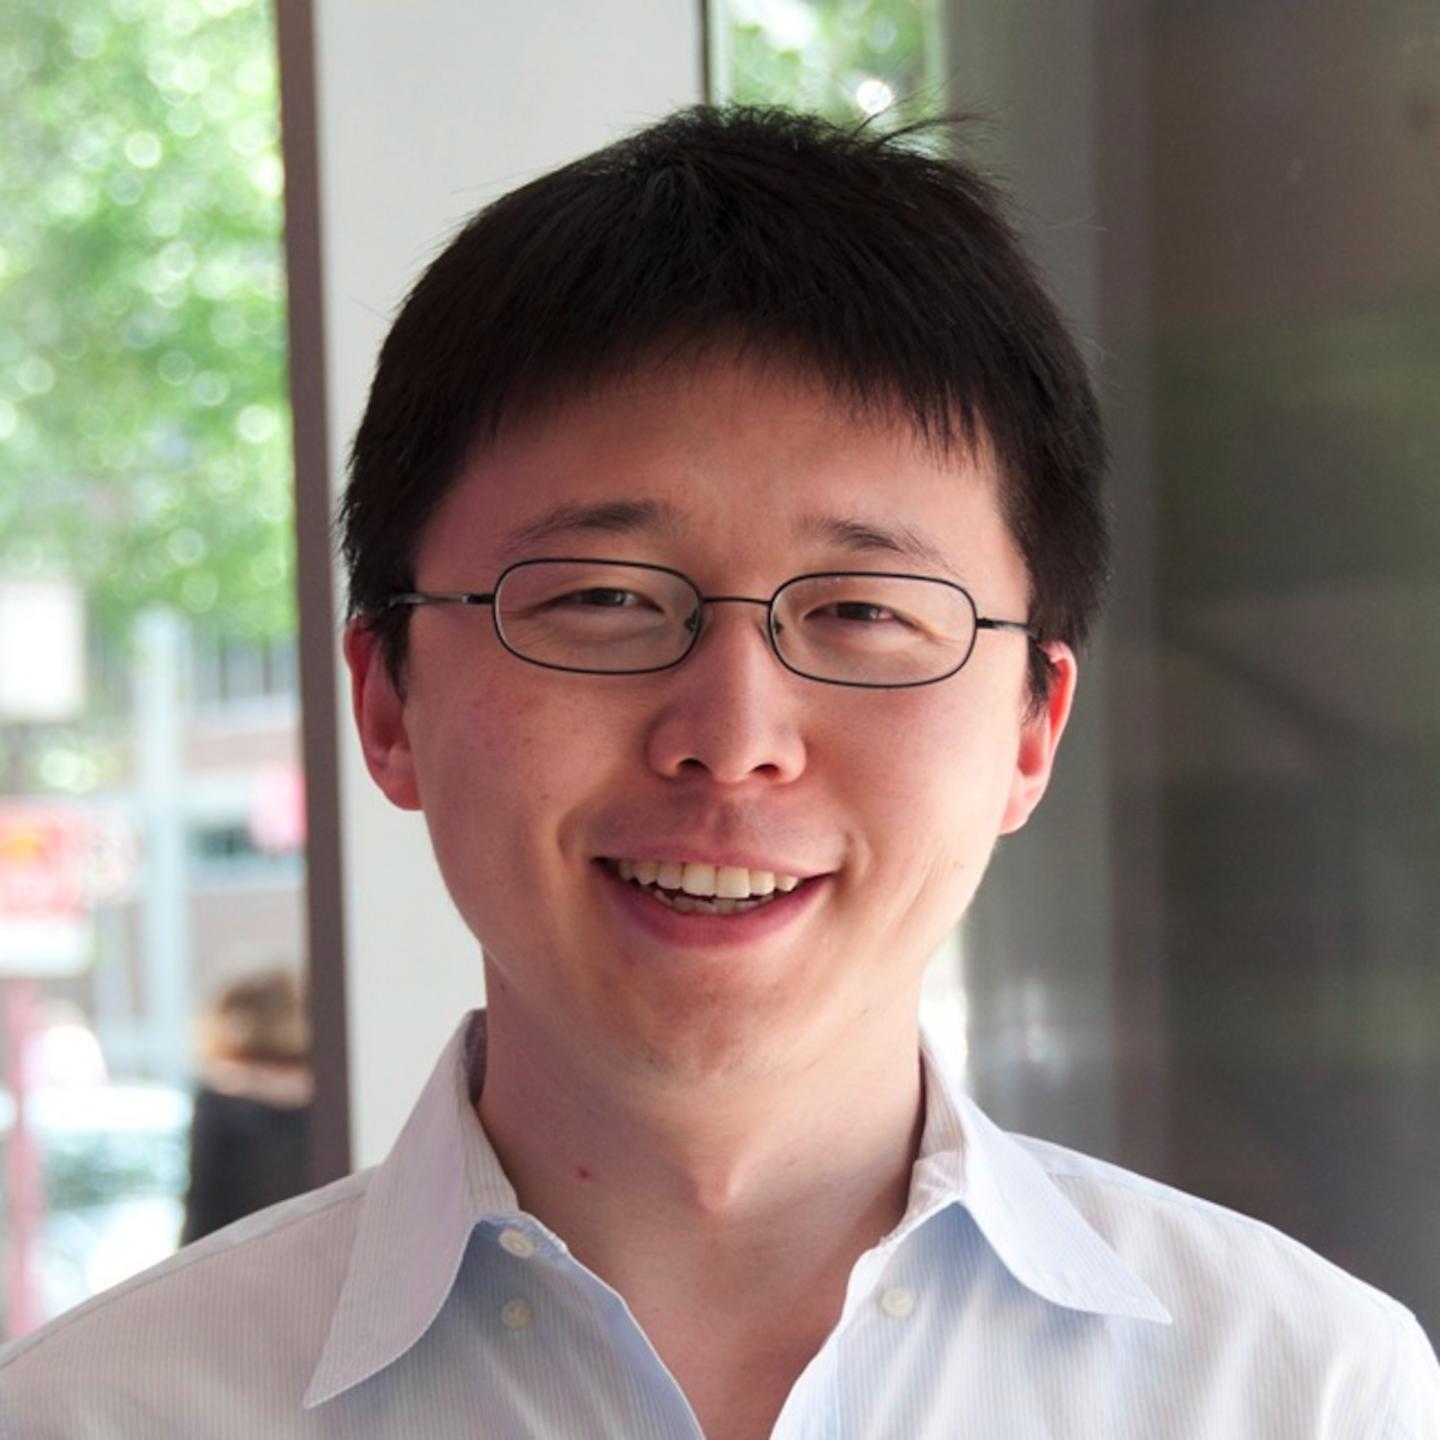 Dr. Feng Zhang Named Recipient of 2016 NYSCF - Robertson Stem Cell Prize